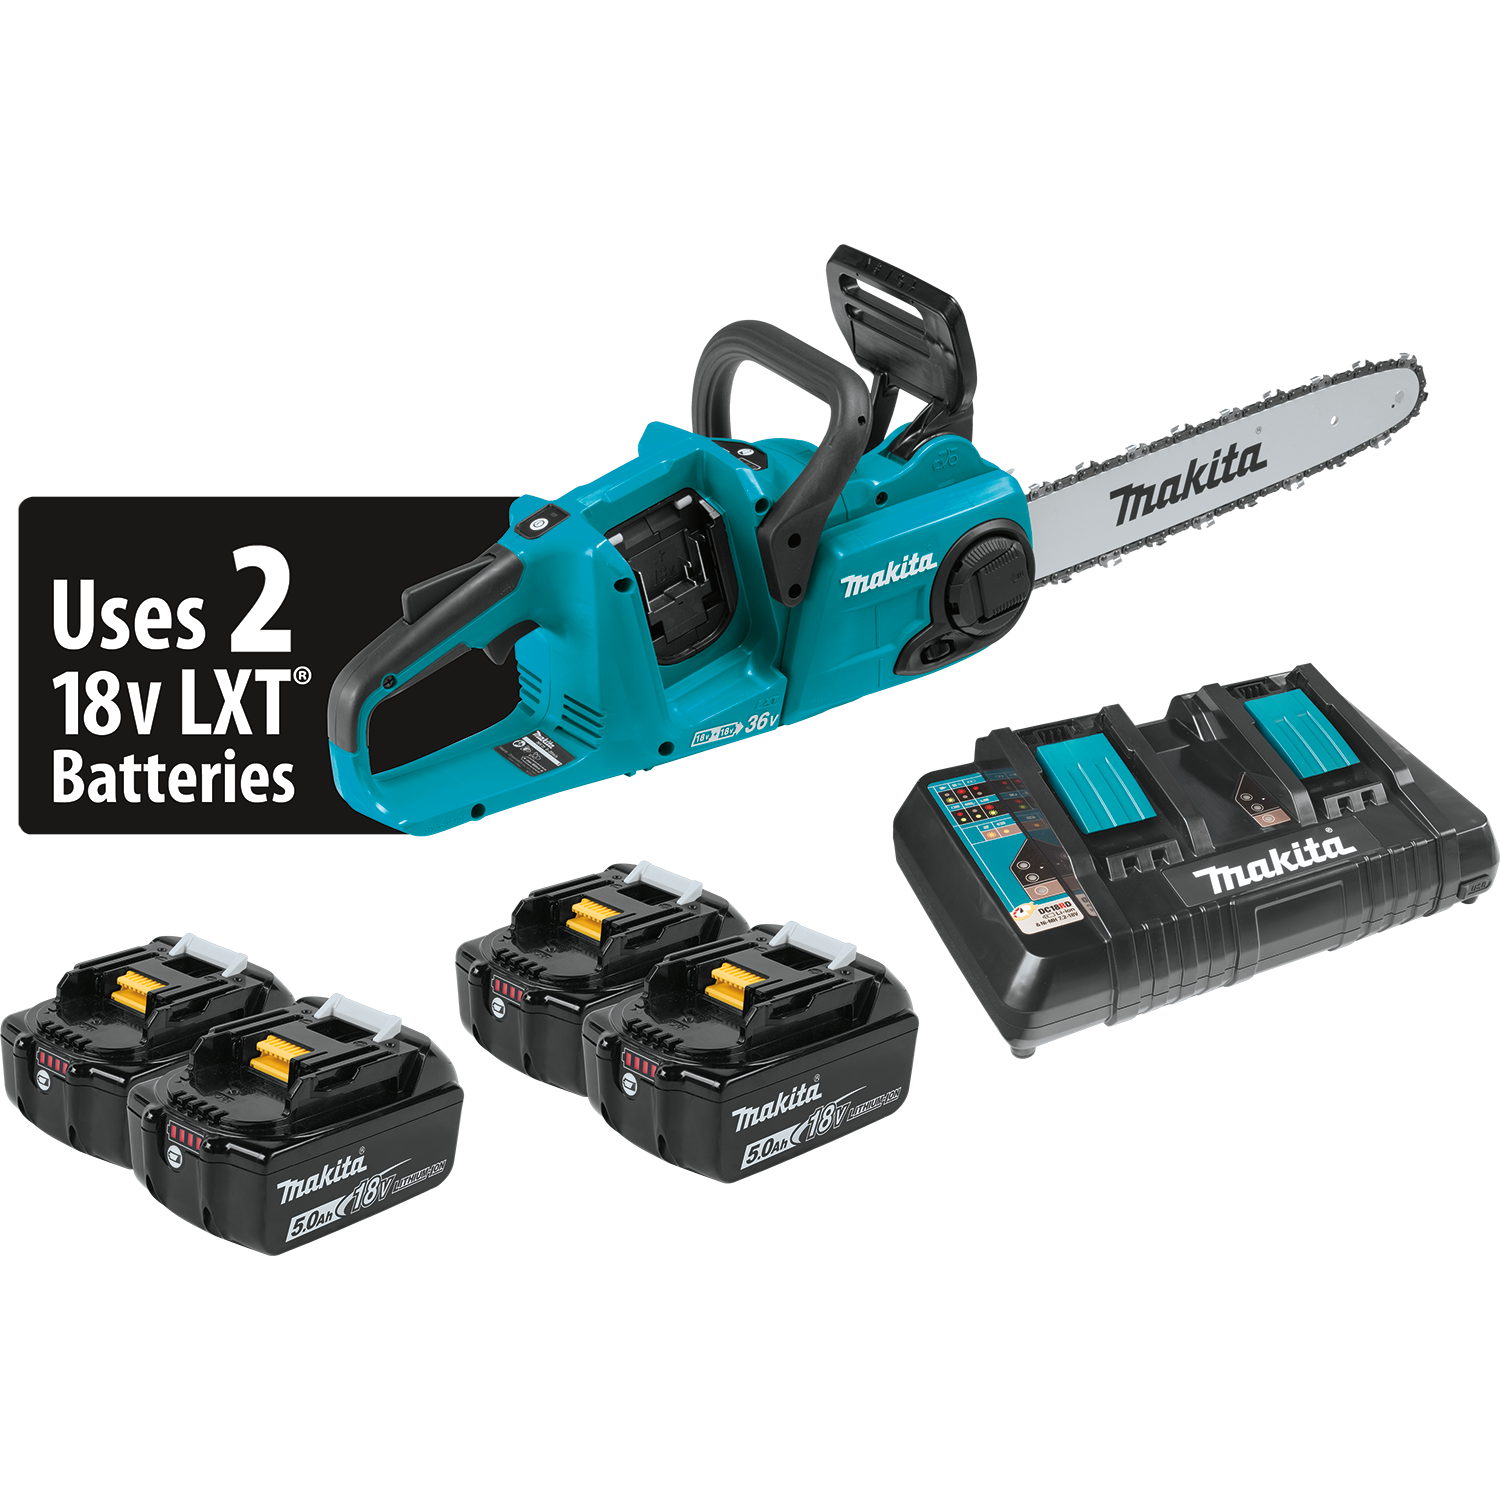 Makita, Chain Saw 18V X2 Brushless w/ Two Extra Batteries - XCU03PT1